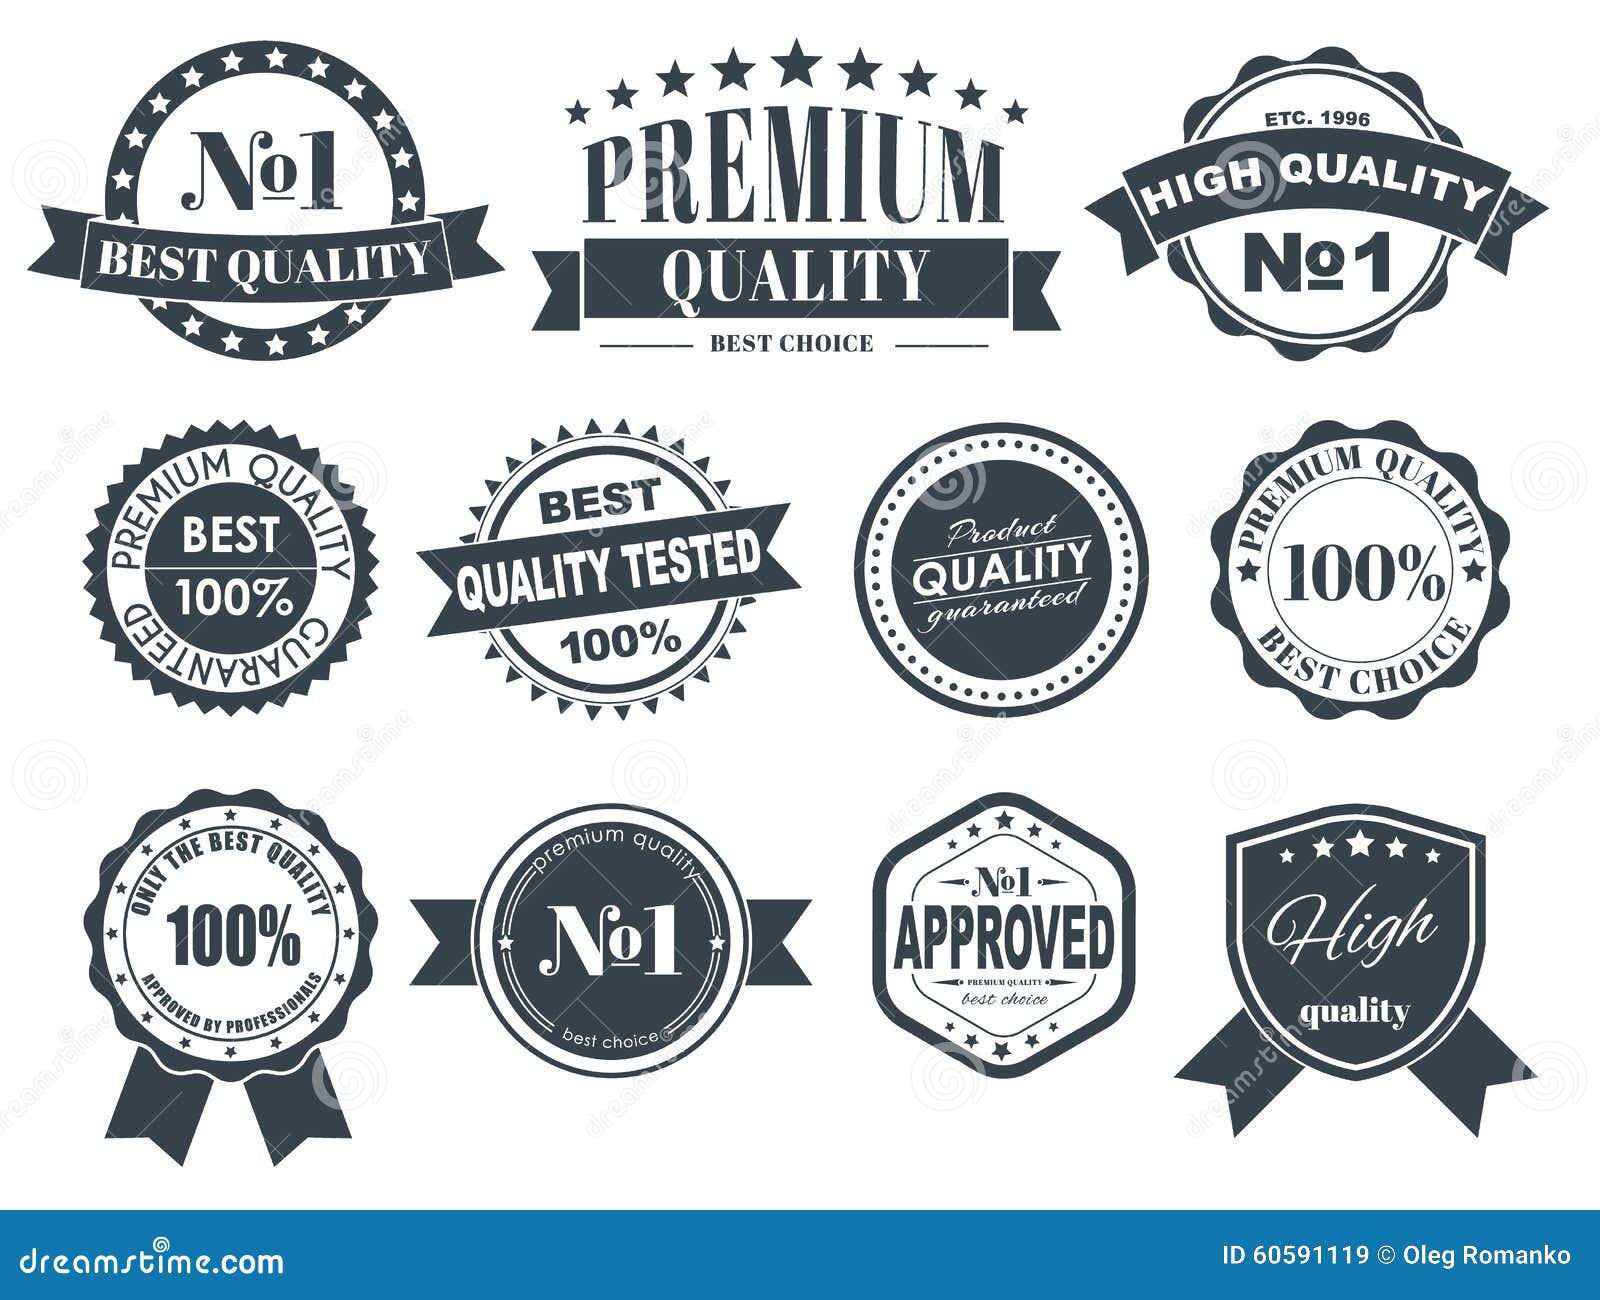 Design Labels with the Quality Mark Stock Vector - Illustration of ...